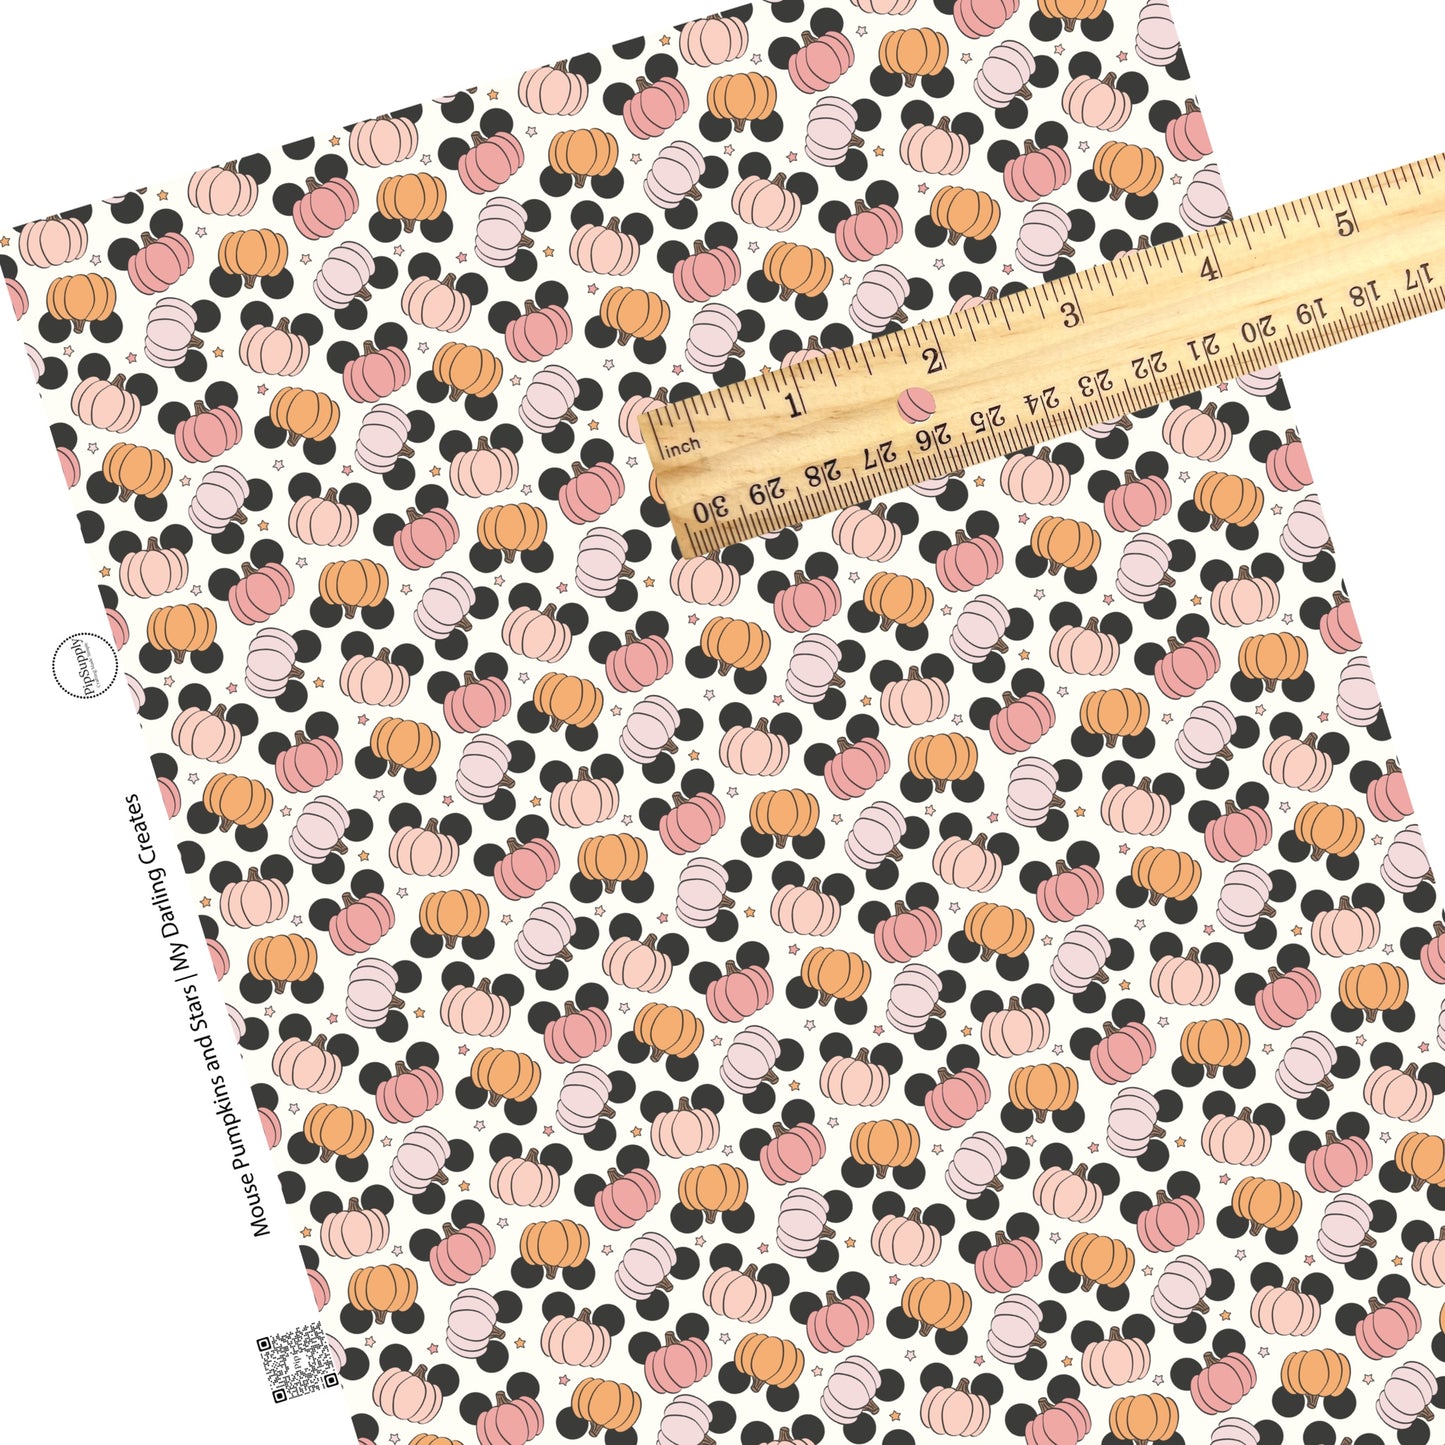 Scattered mouse head pumpkins and stars on cream faux leather sheets